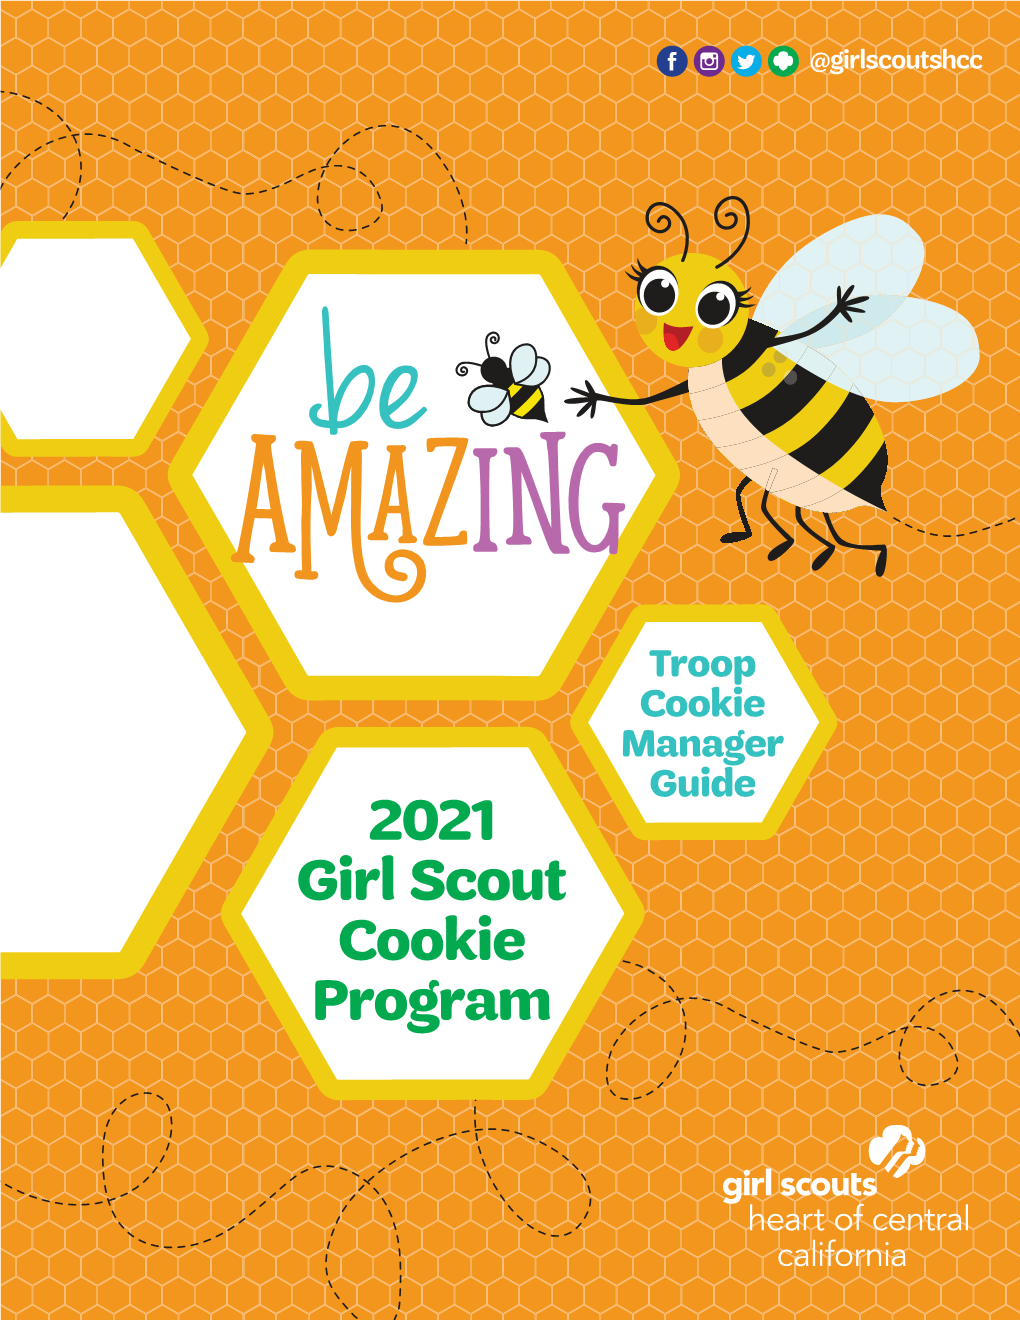 2021 Girl Scout Cookie Program